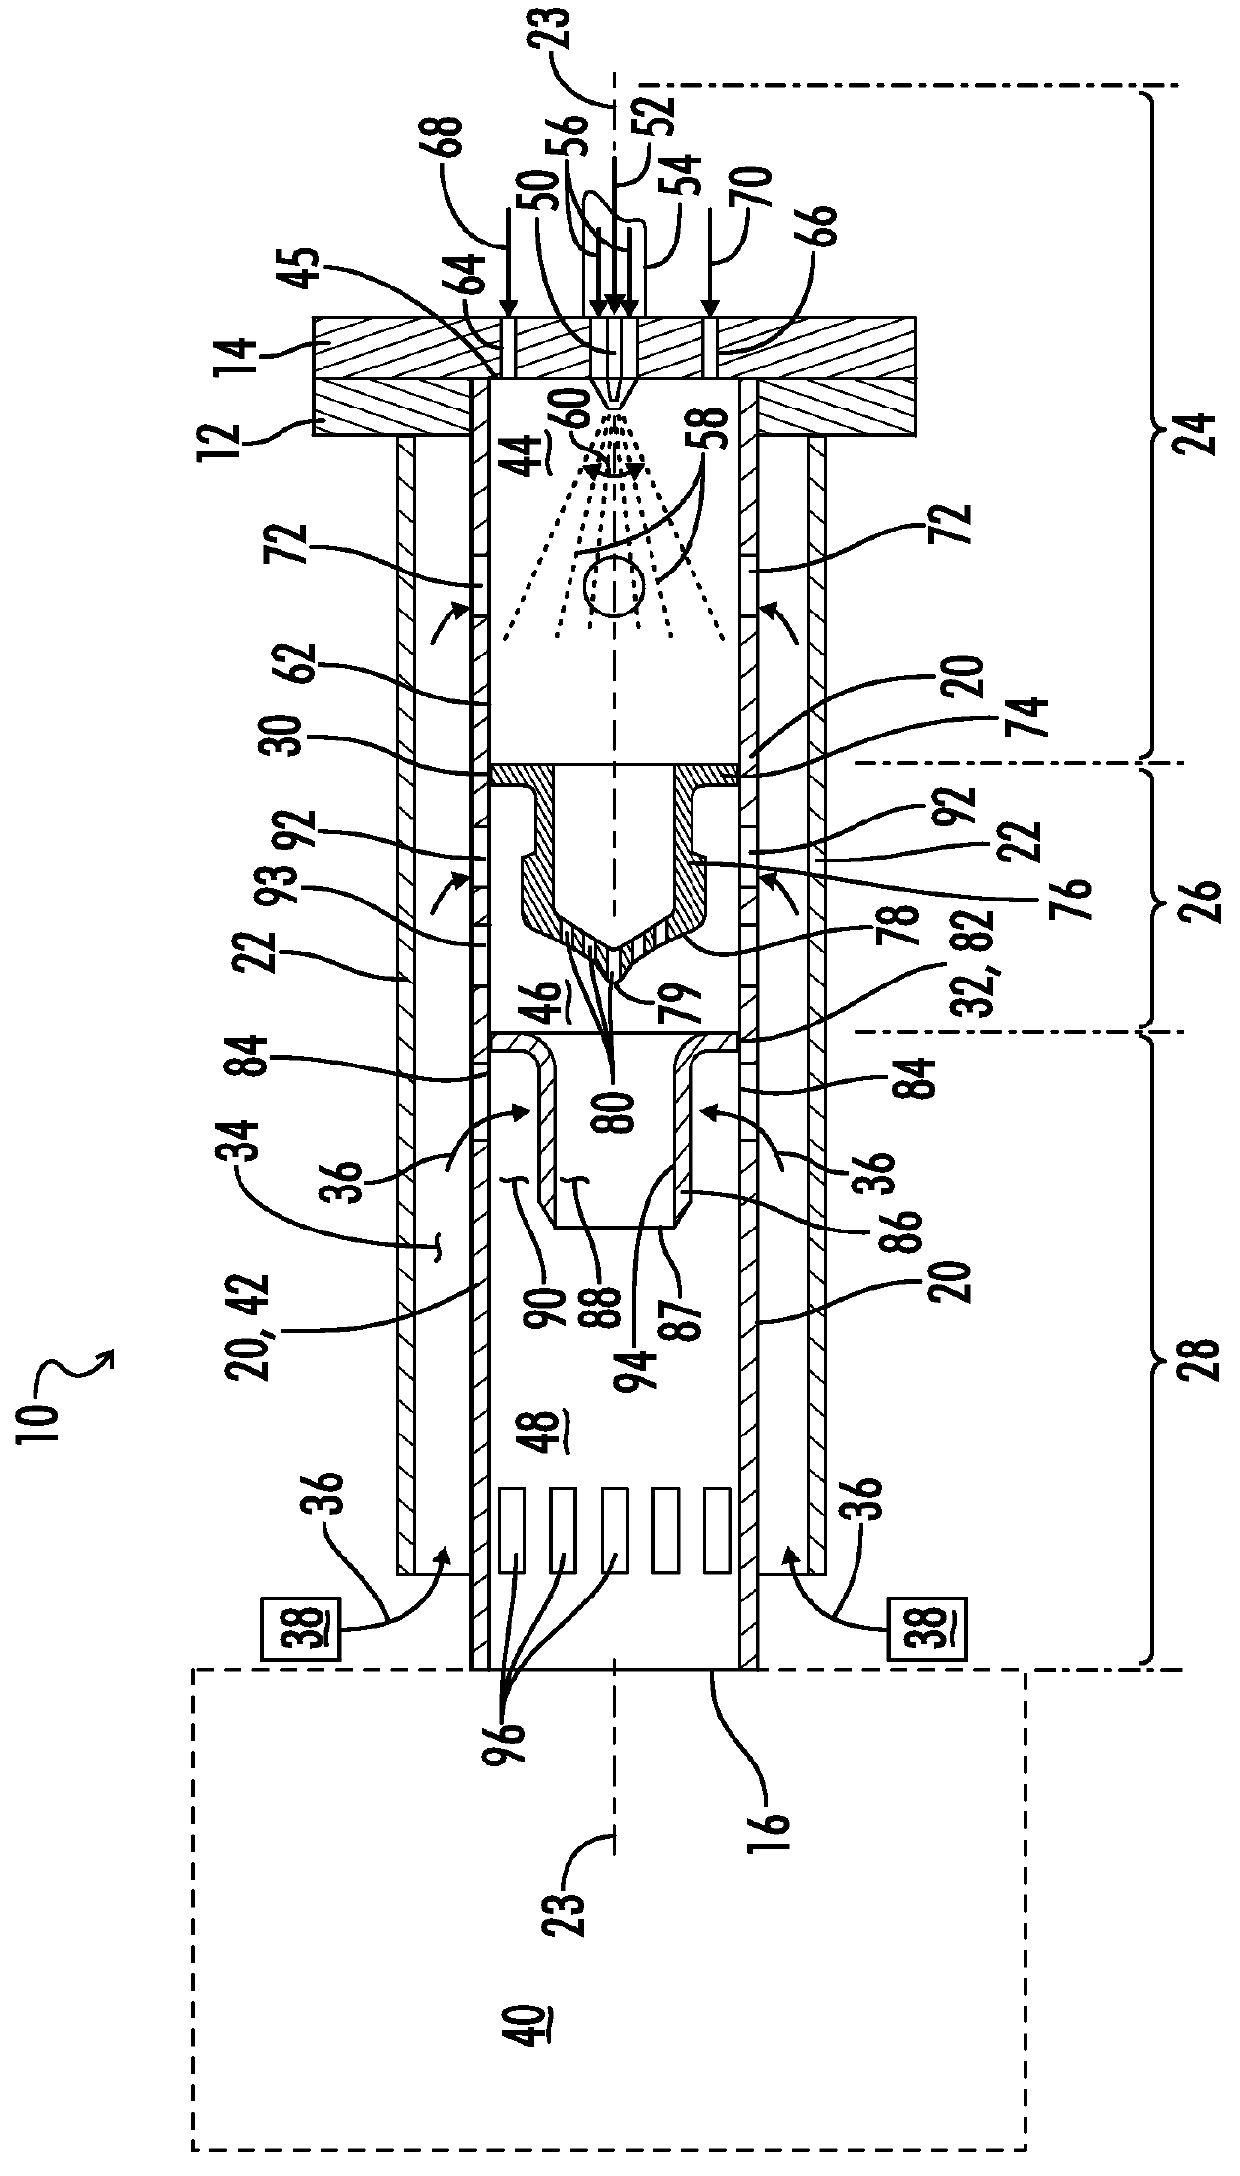 Fuel Injector For High Flame Speed Fuel Combustion